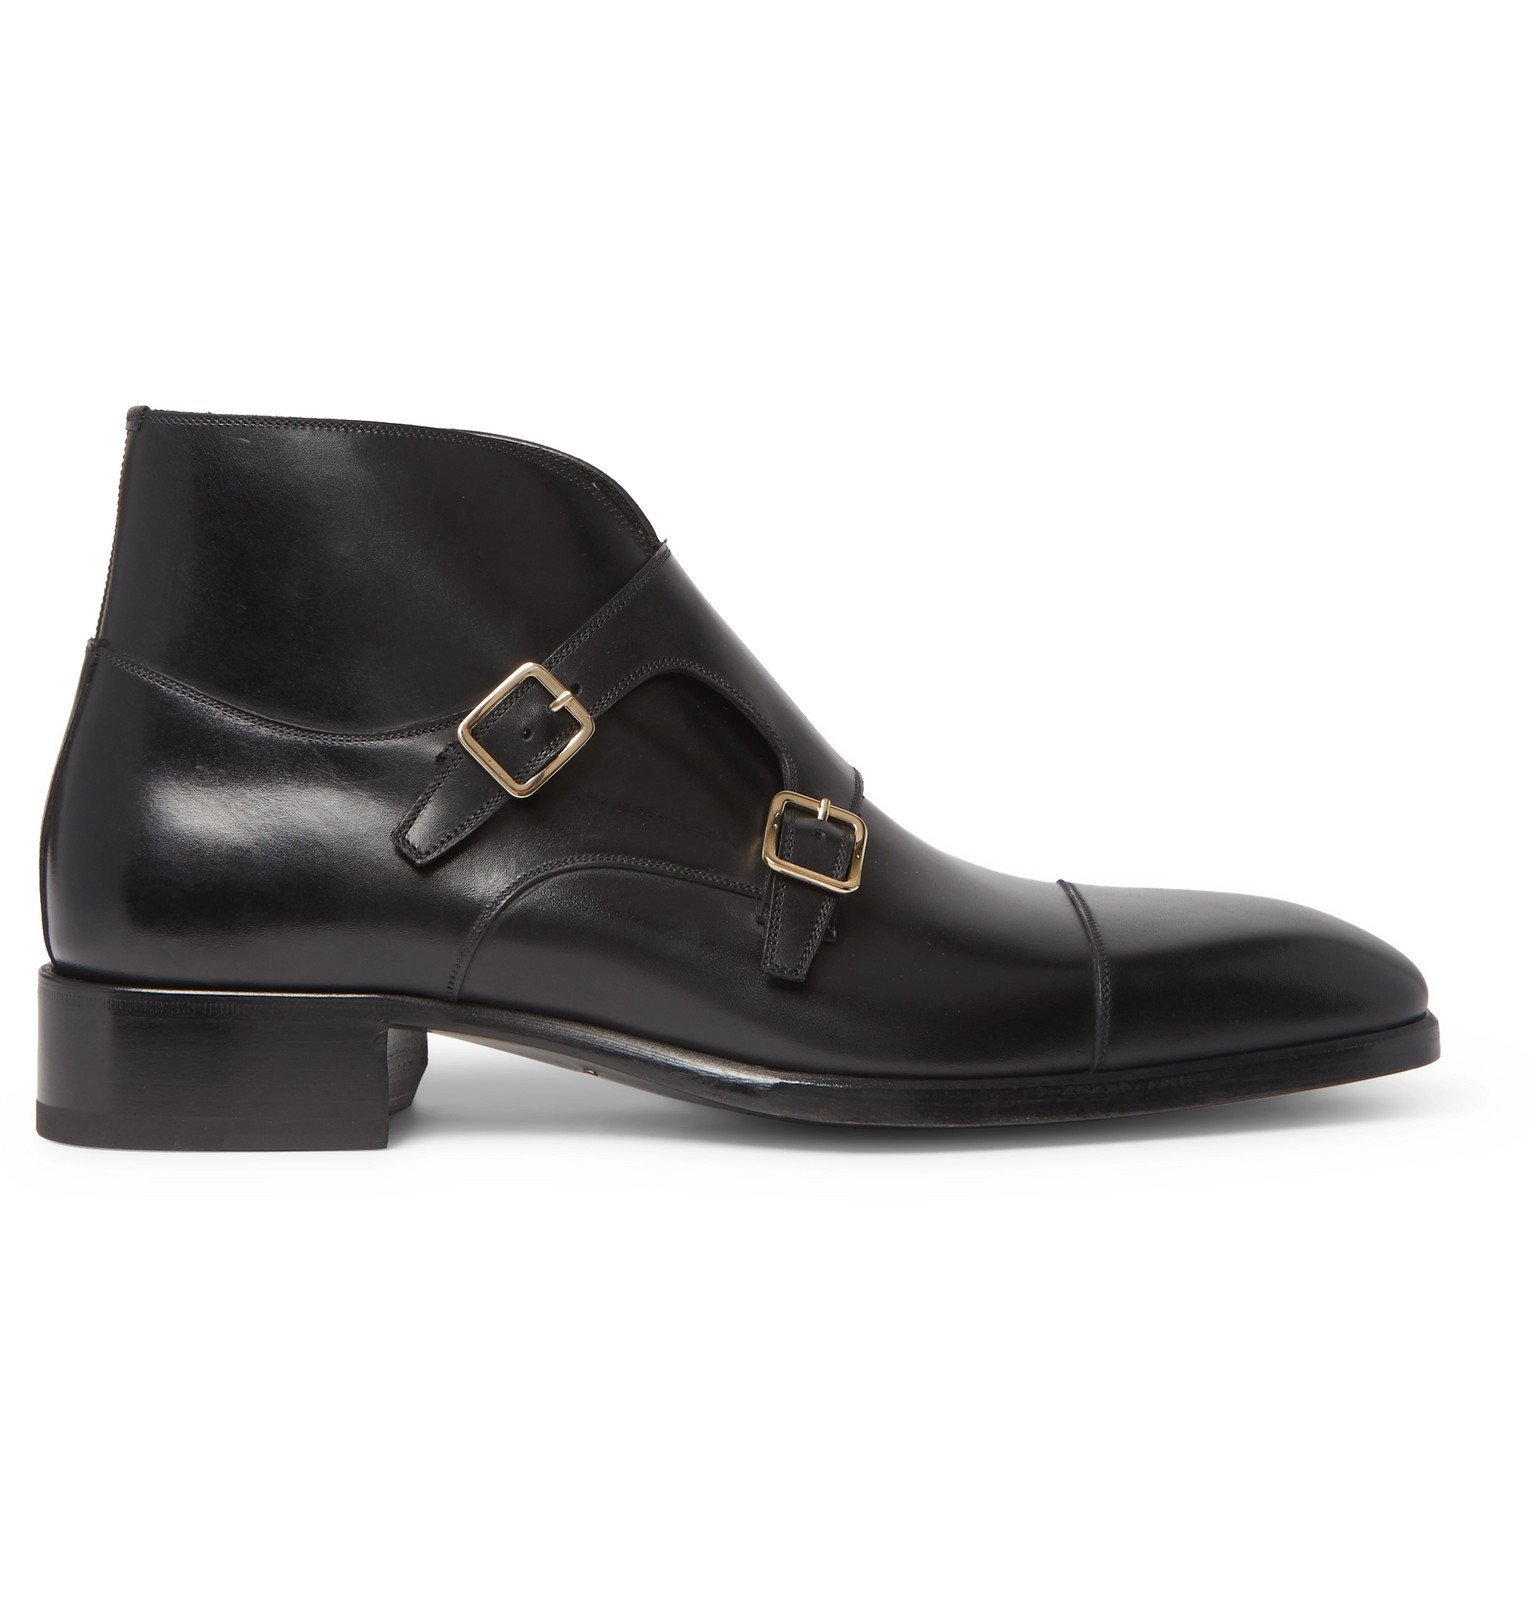 TOM FORD - Sutherland Leather Monk Strap Boots - Black TOM FORD